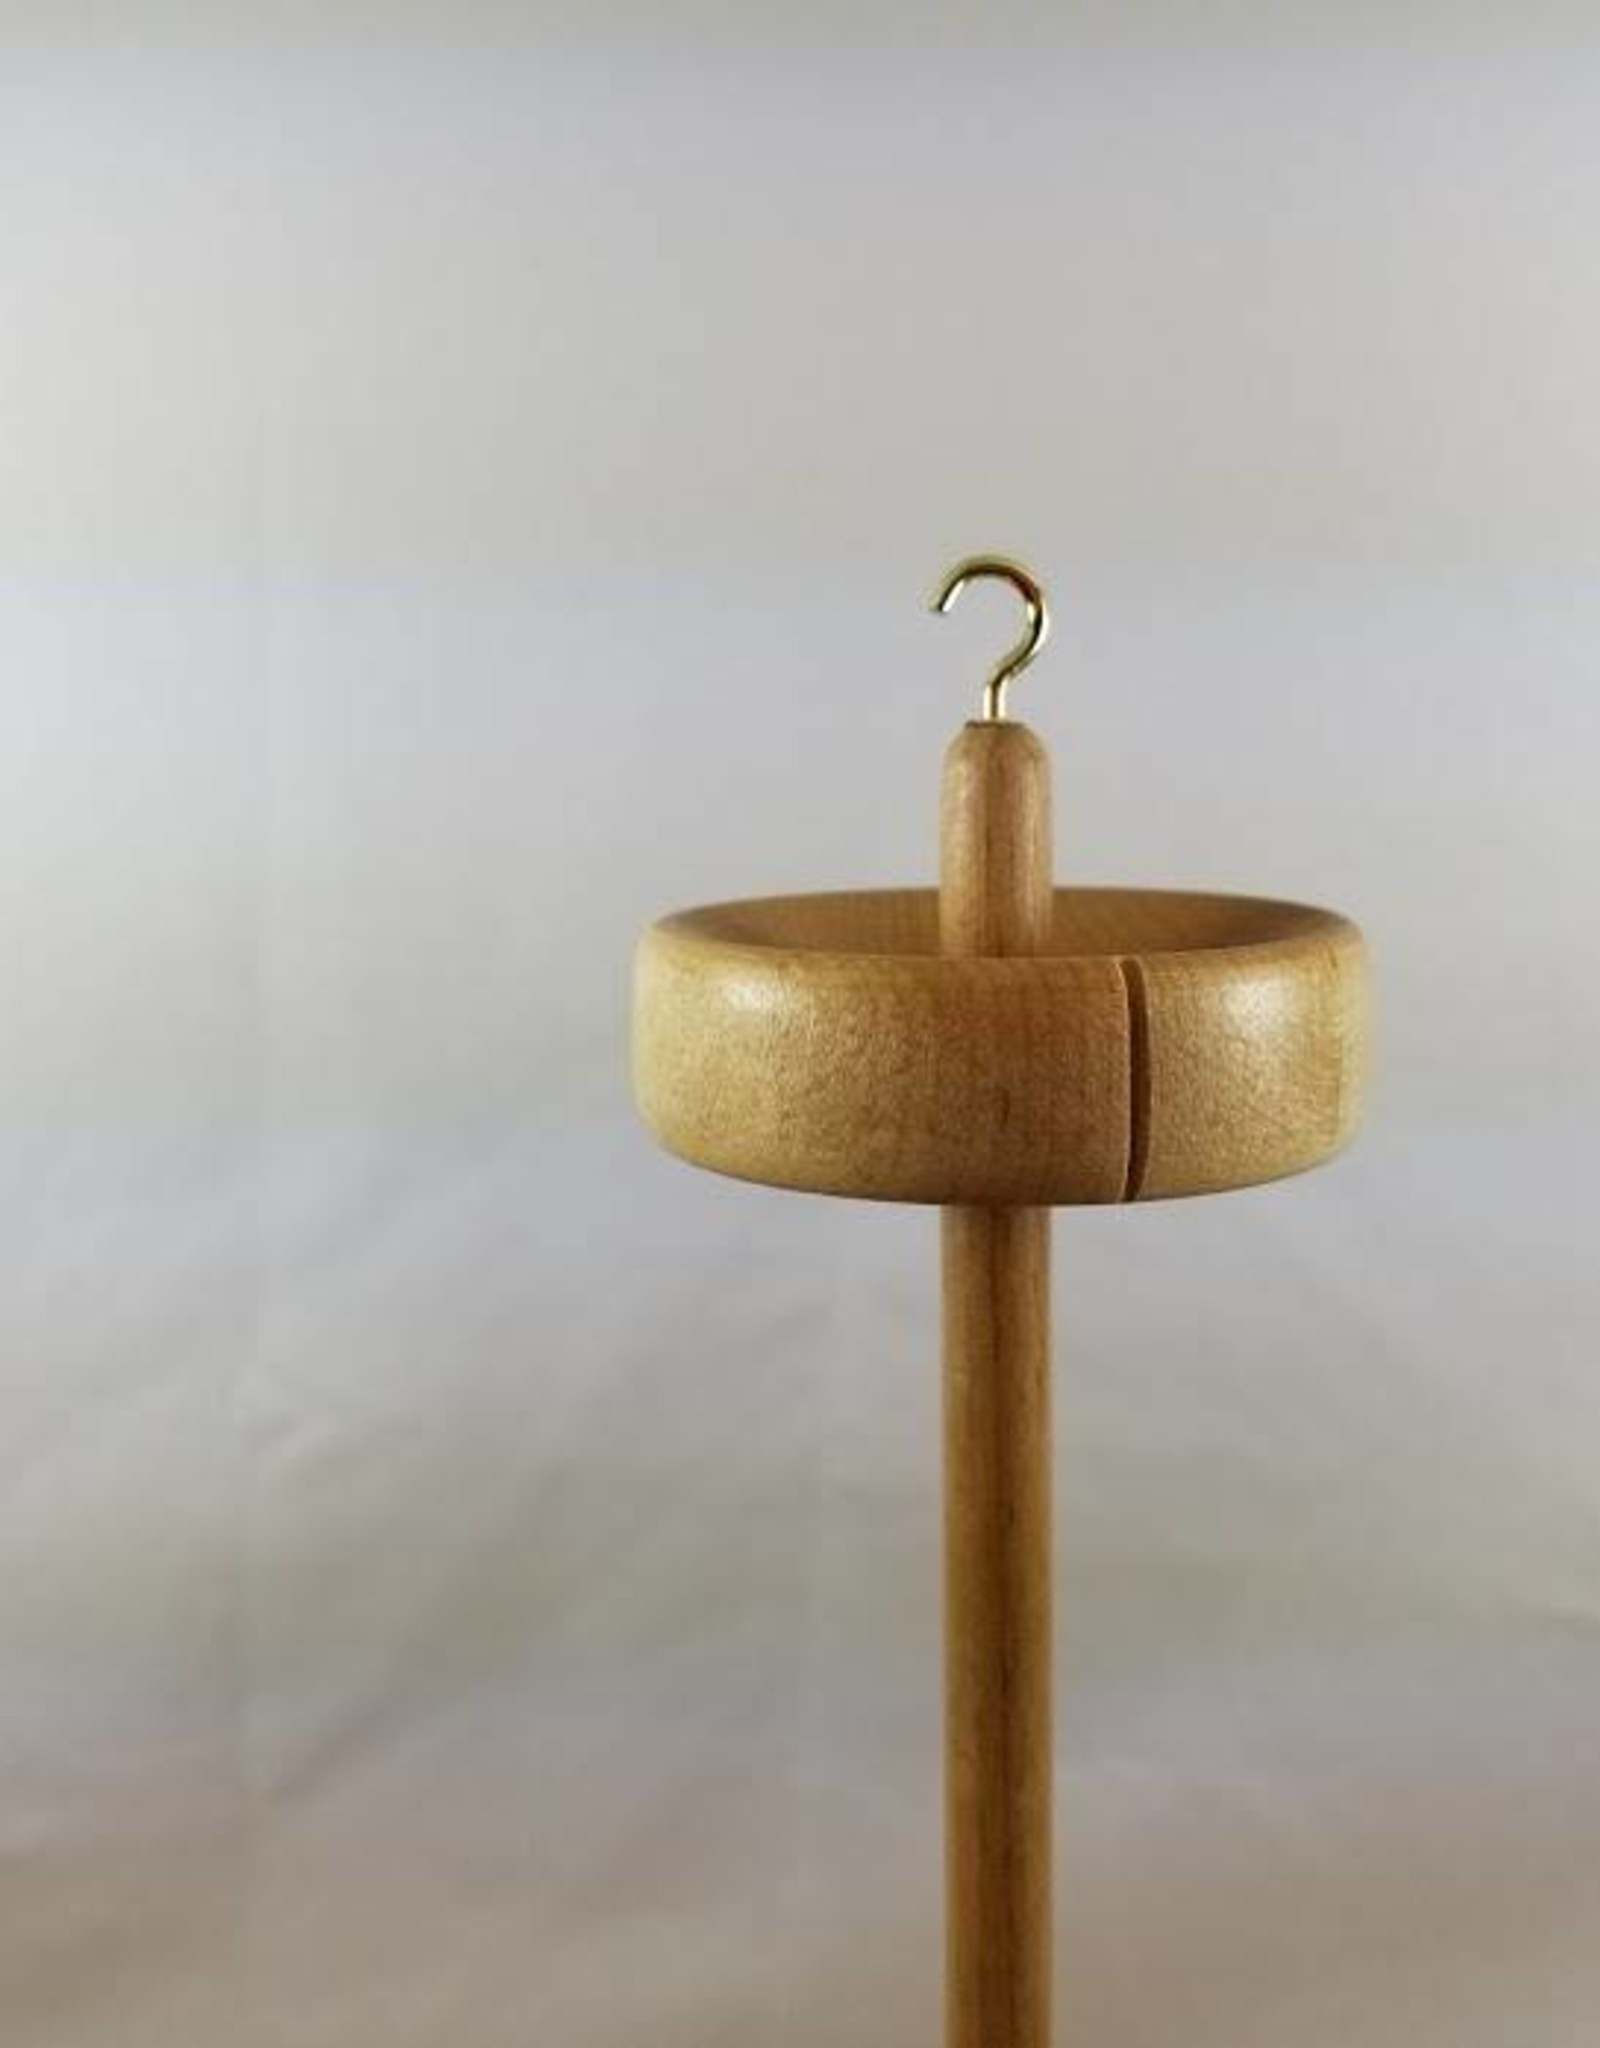 Drop Spindle Student Wood - The Yarn Underground